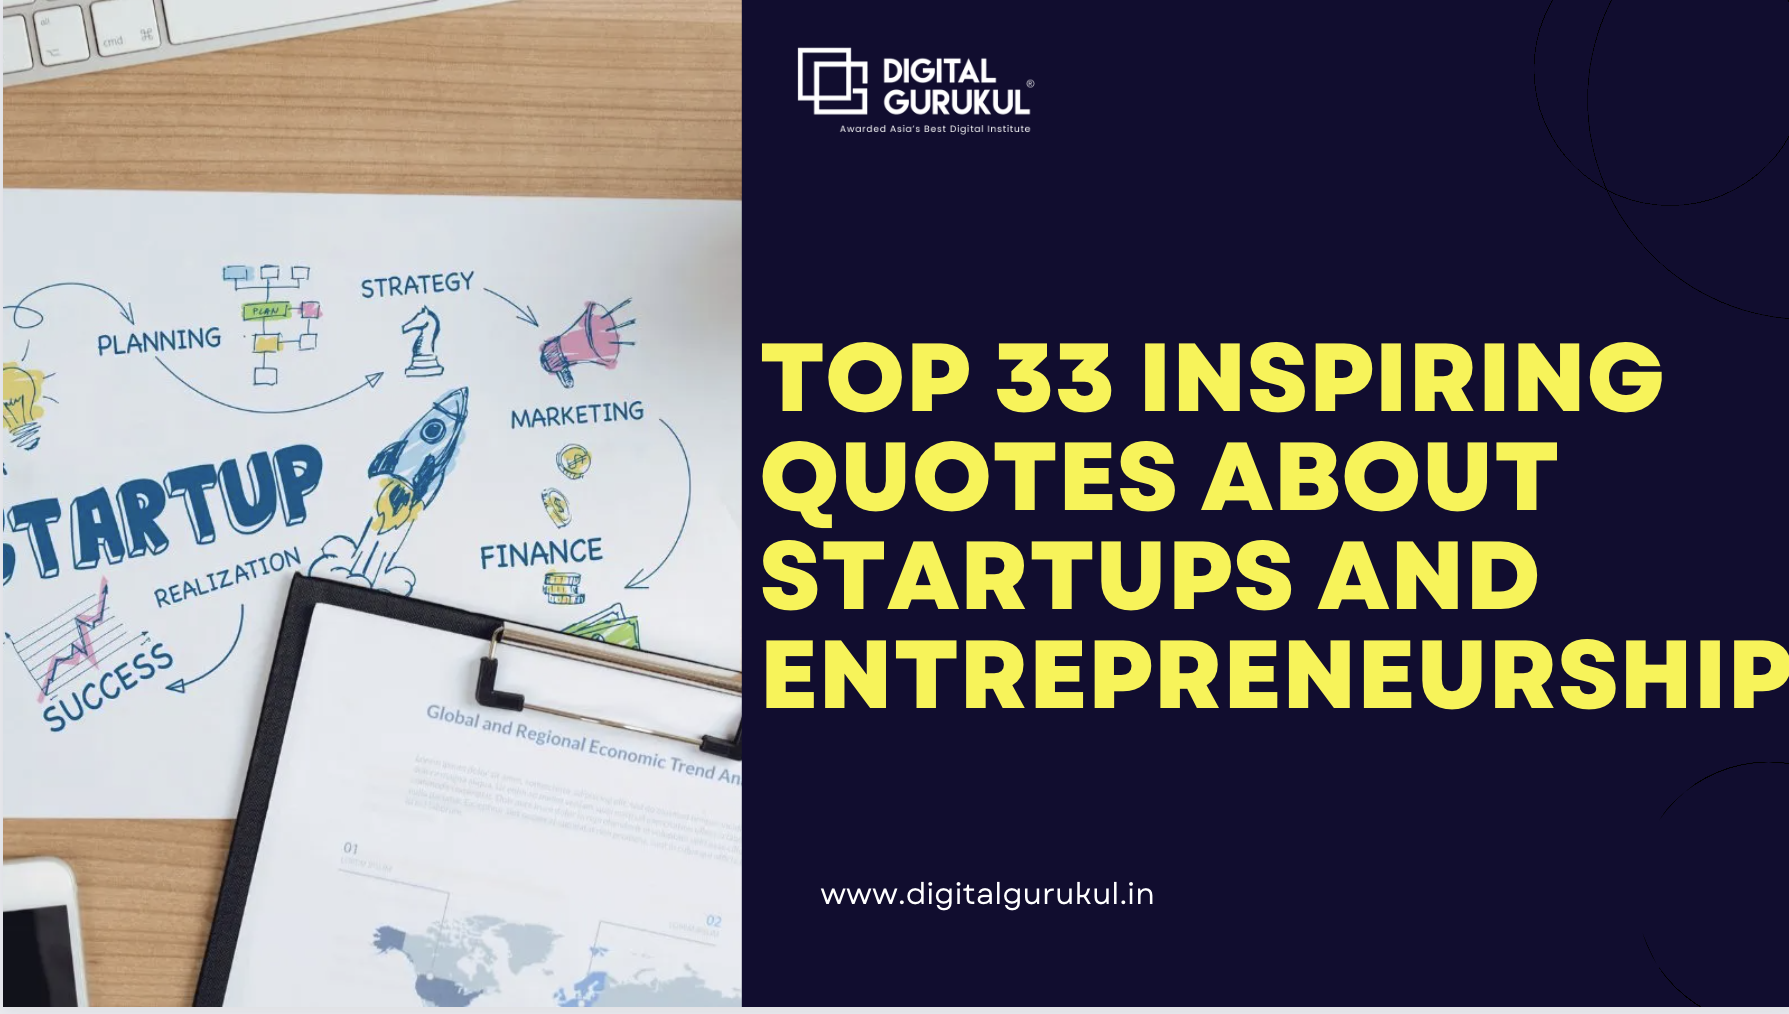 Top 33 inspiring quote about startups and entrepreneurship